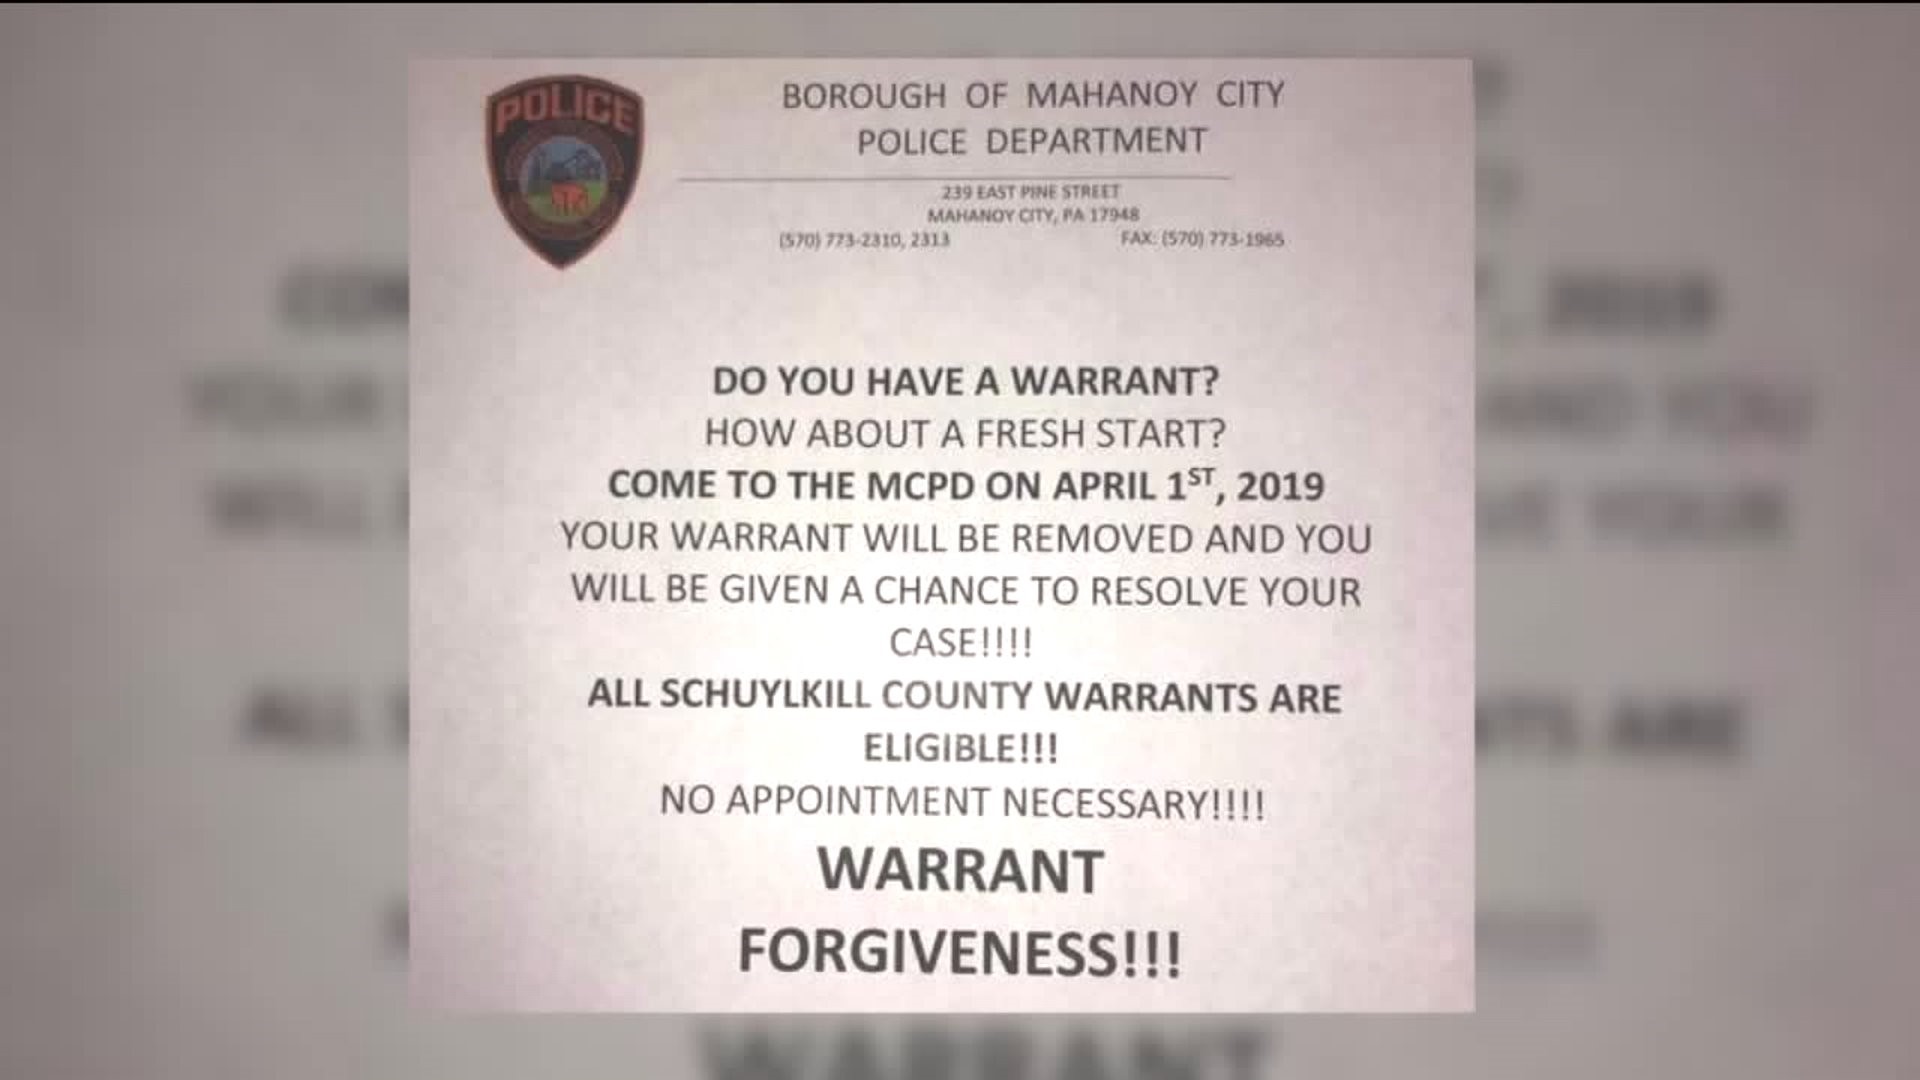 Police Department Has Fun on April Fools' Day